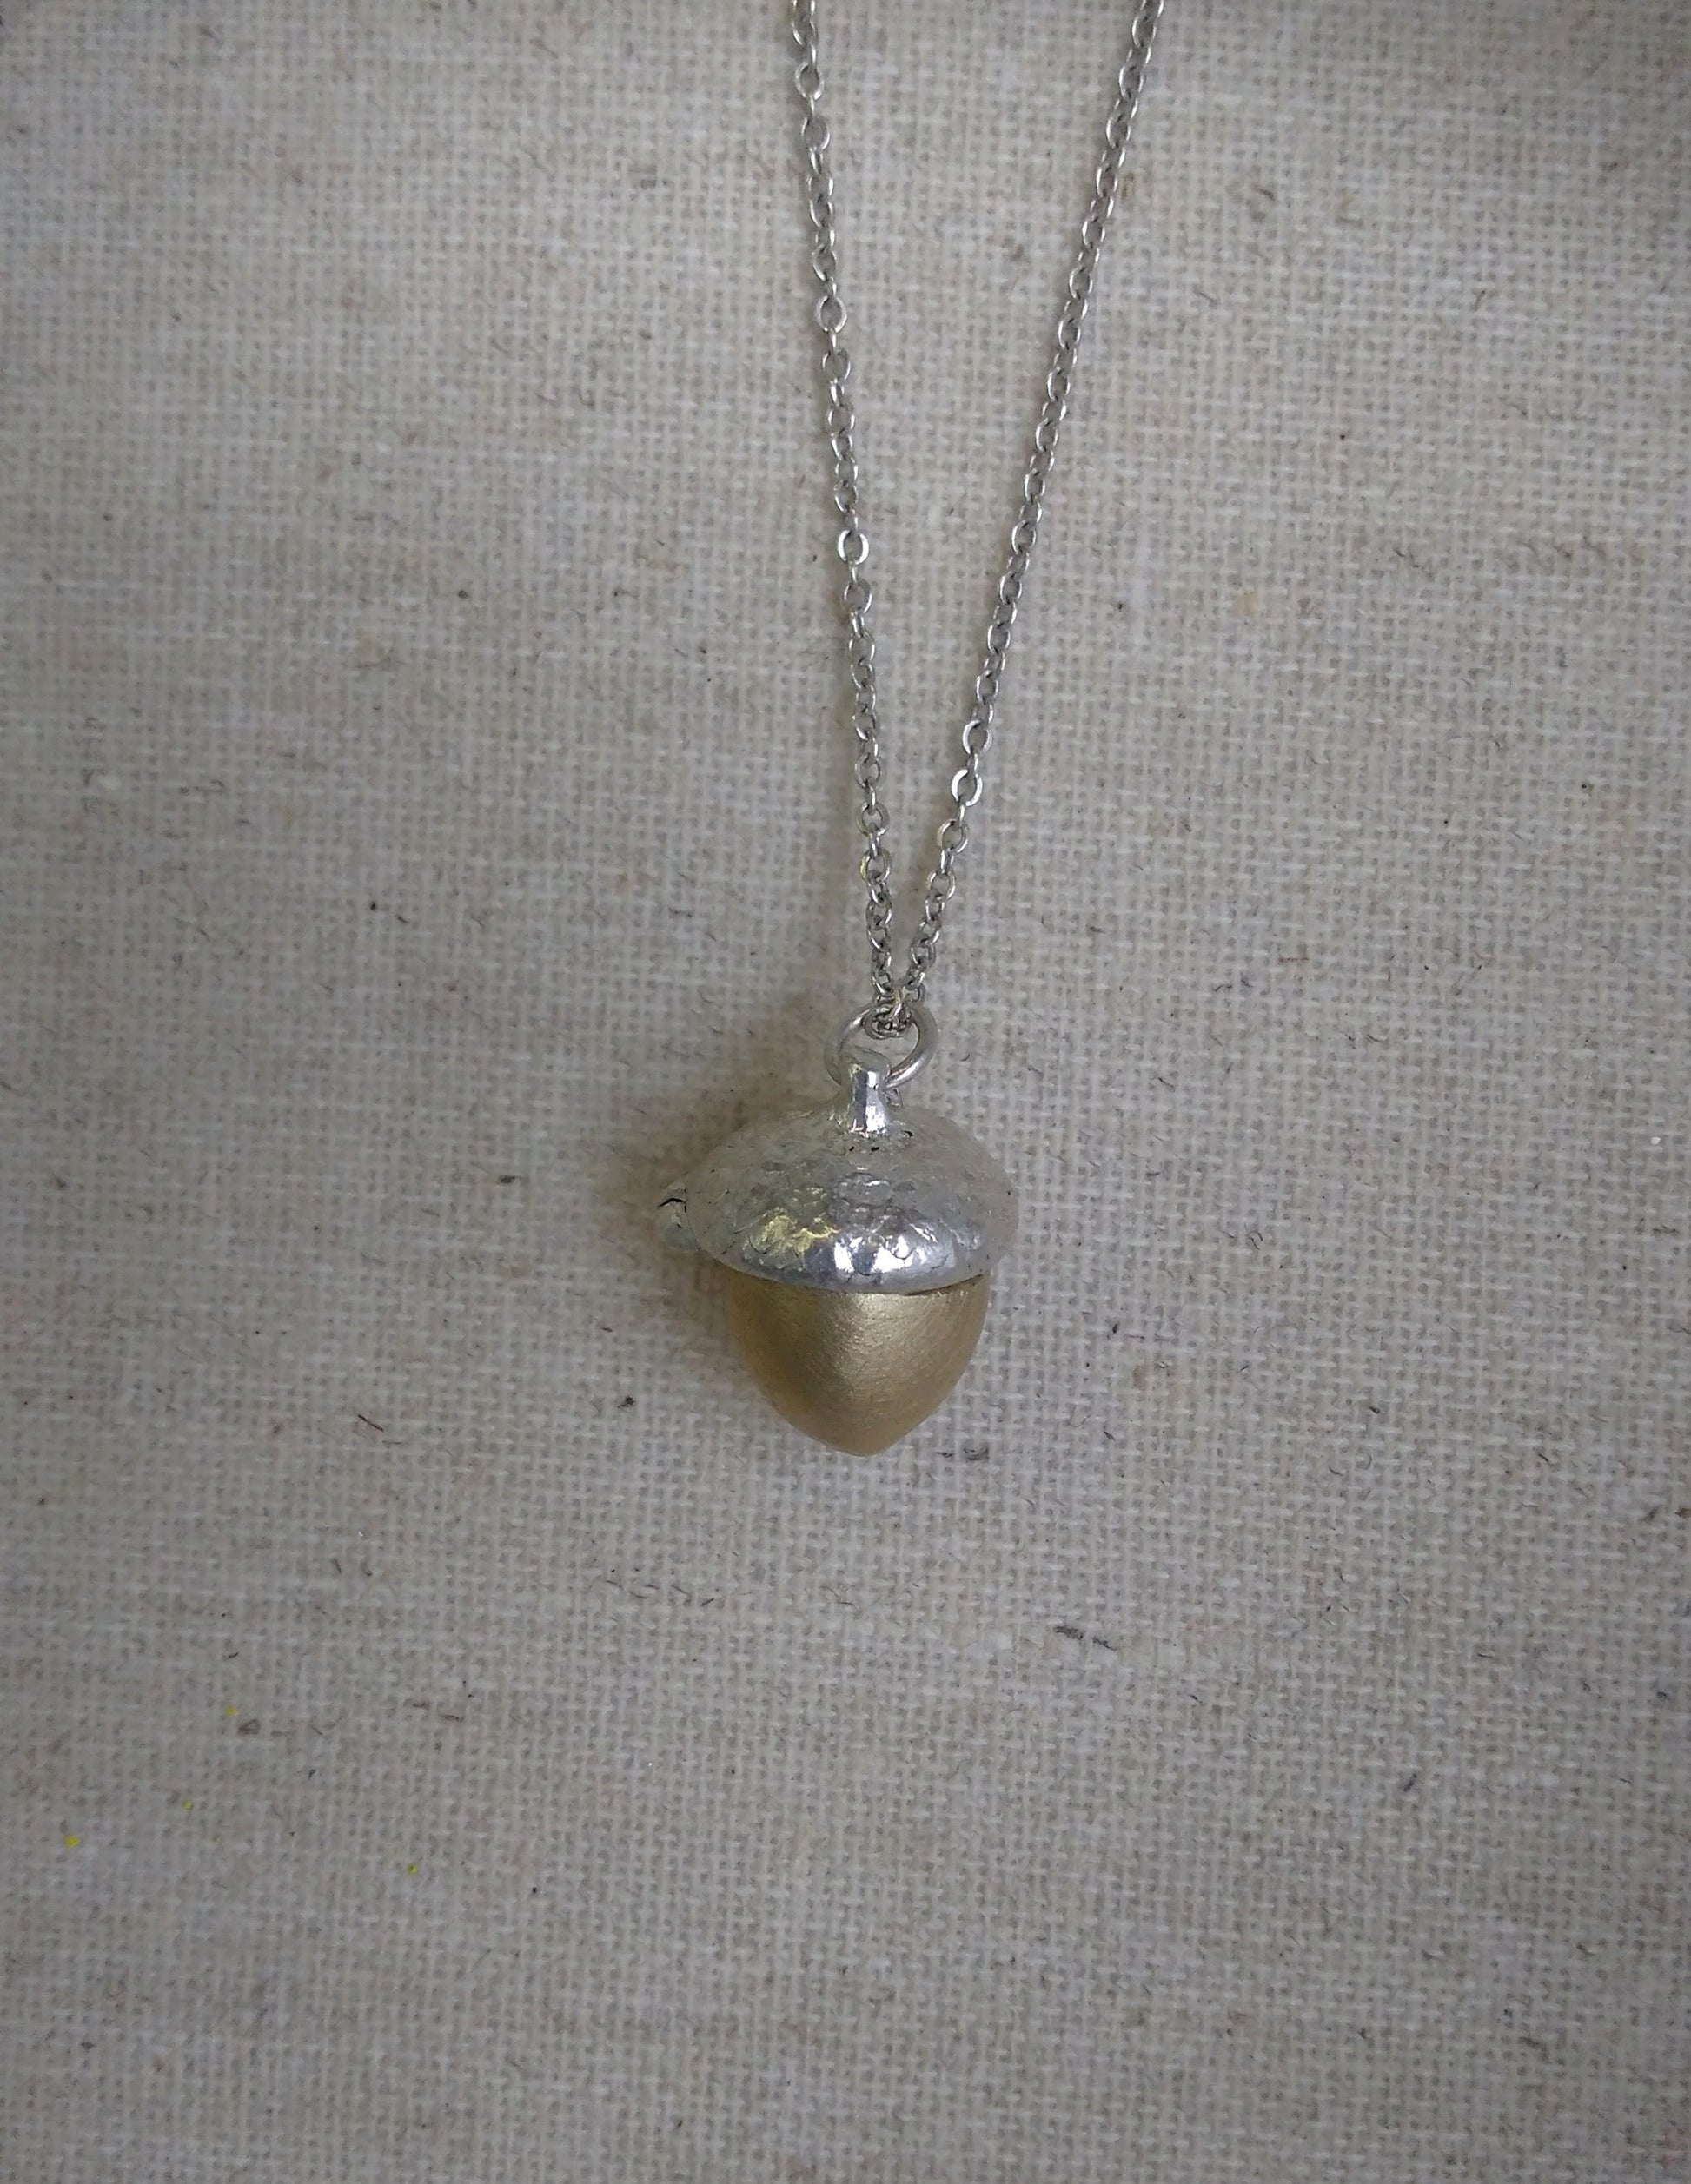 close up of closed acorn locket showing detail of acorn cap hanging on a silver chain